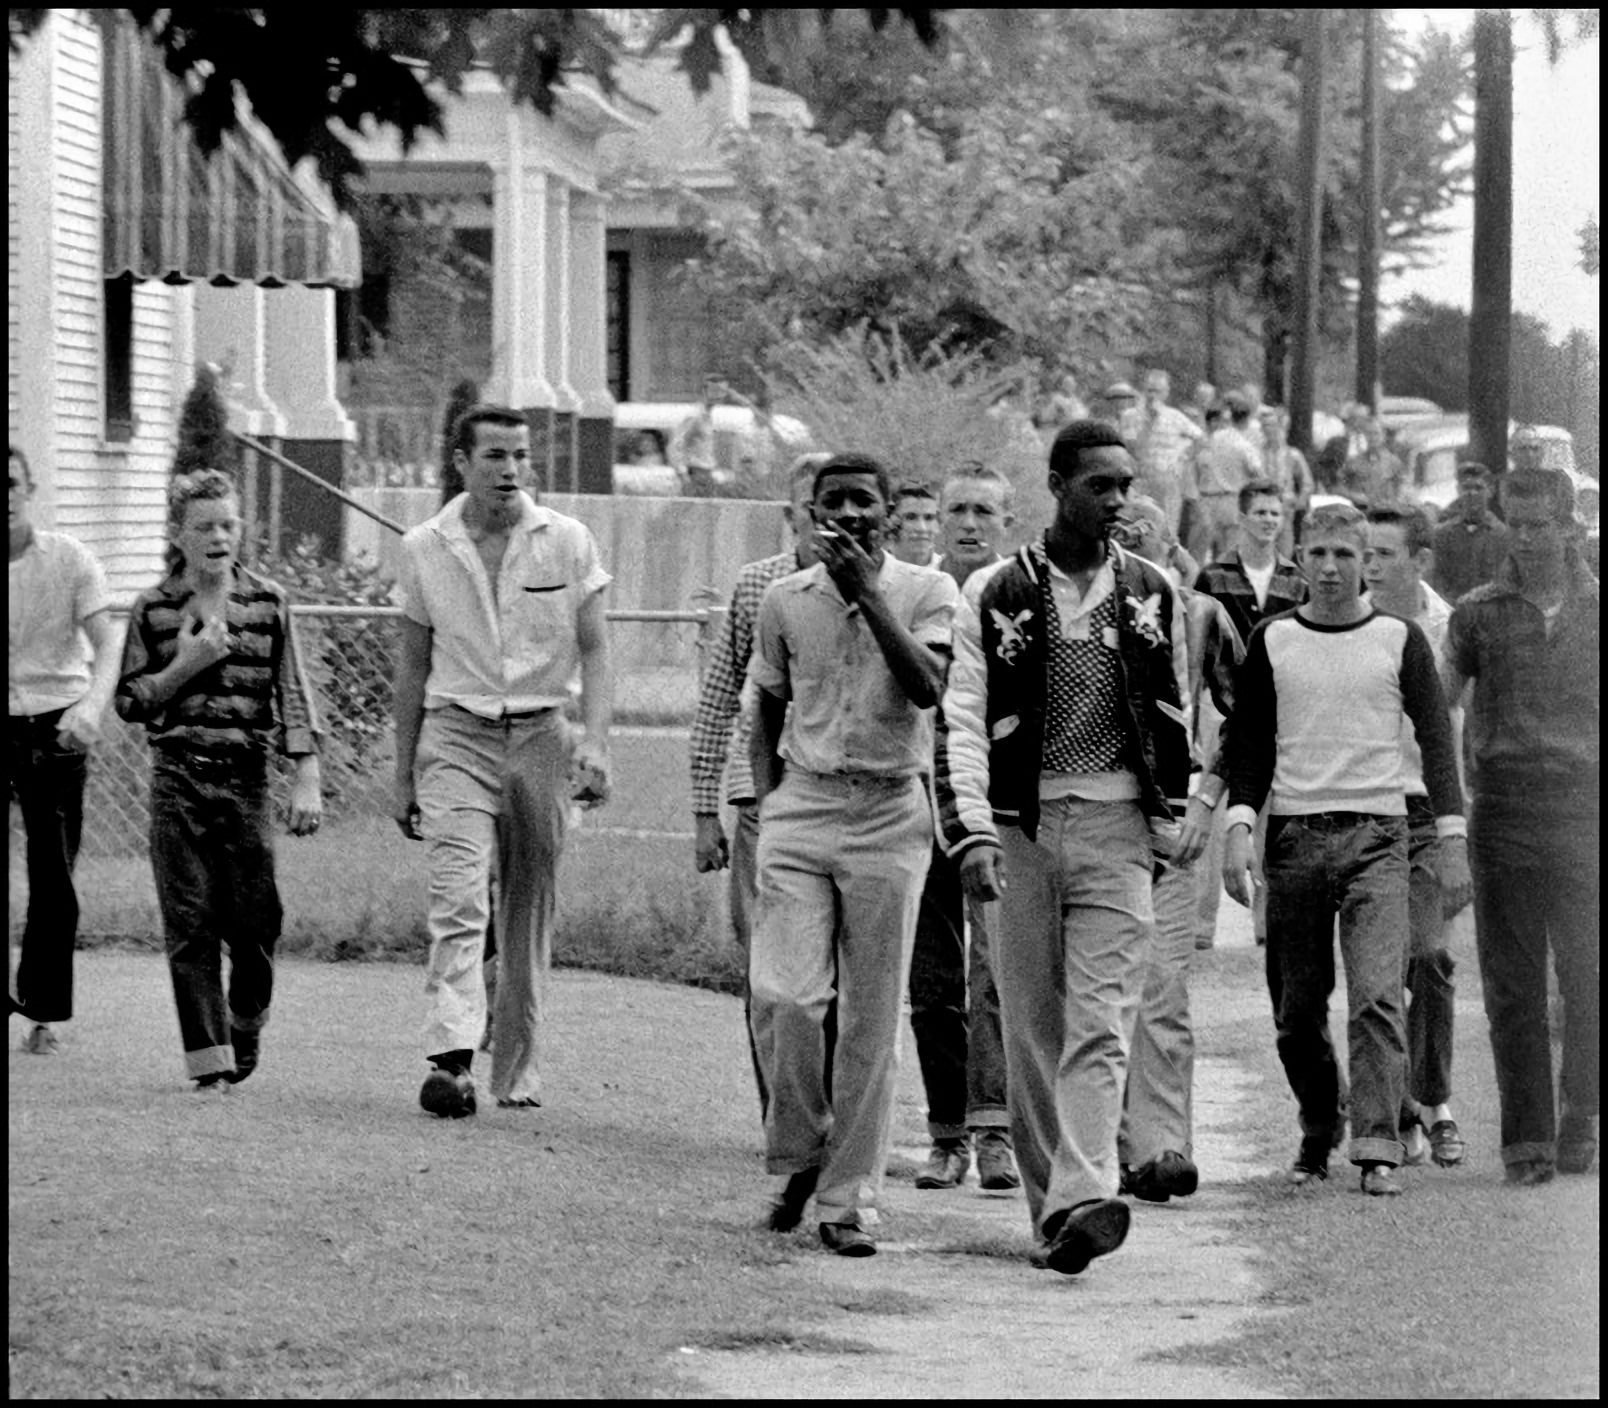 Two black students are harassed by classmates on their way to school – Little Rock, Arkansas 1957